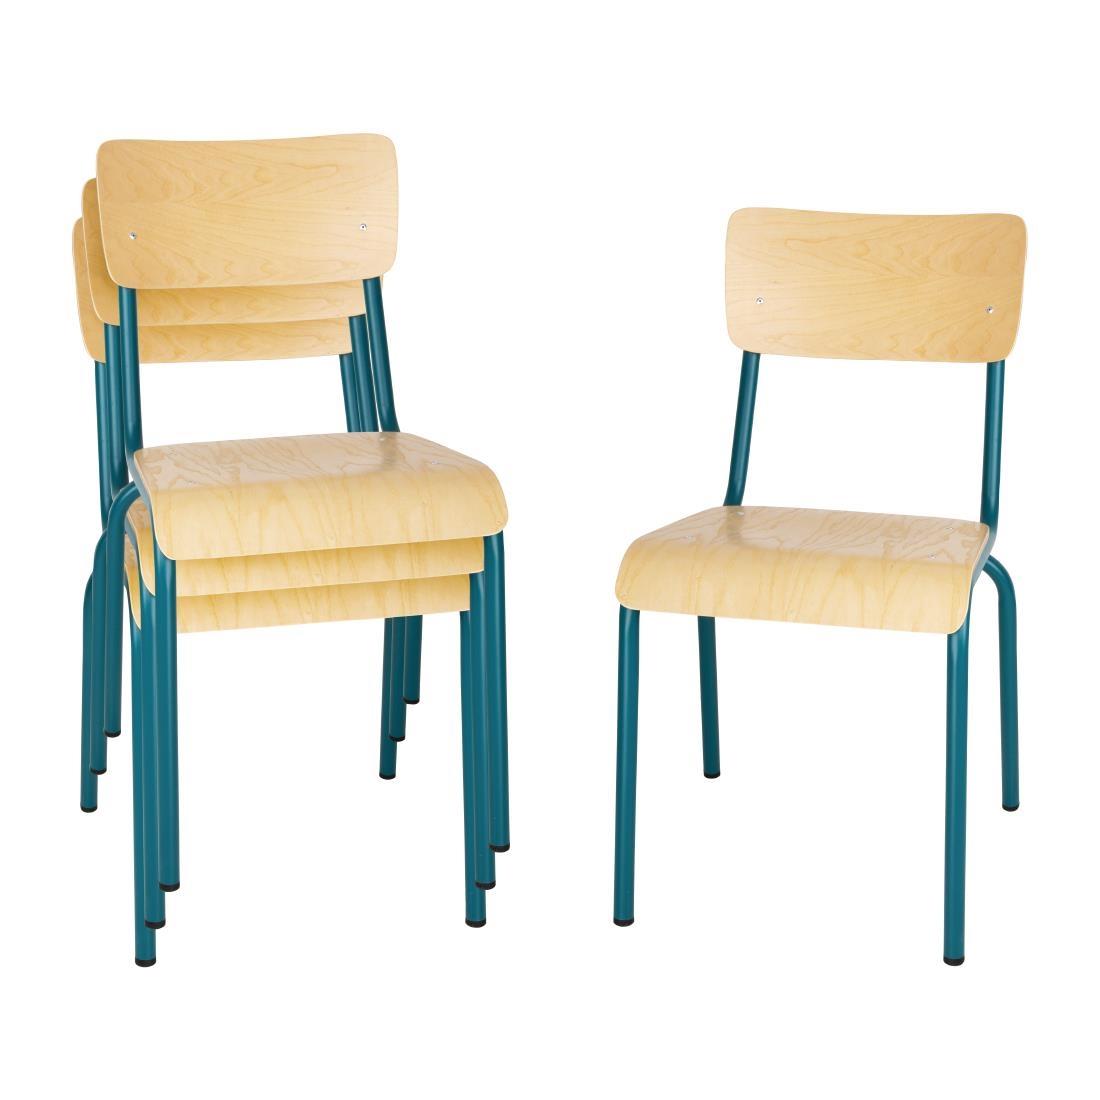 Bolero Cantina Side Chairs with Wooden Seat Pad and Backrest Teal (Pack of 4) - FB944  - 6